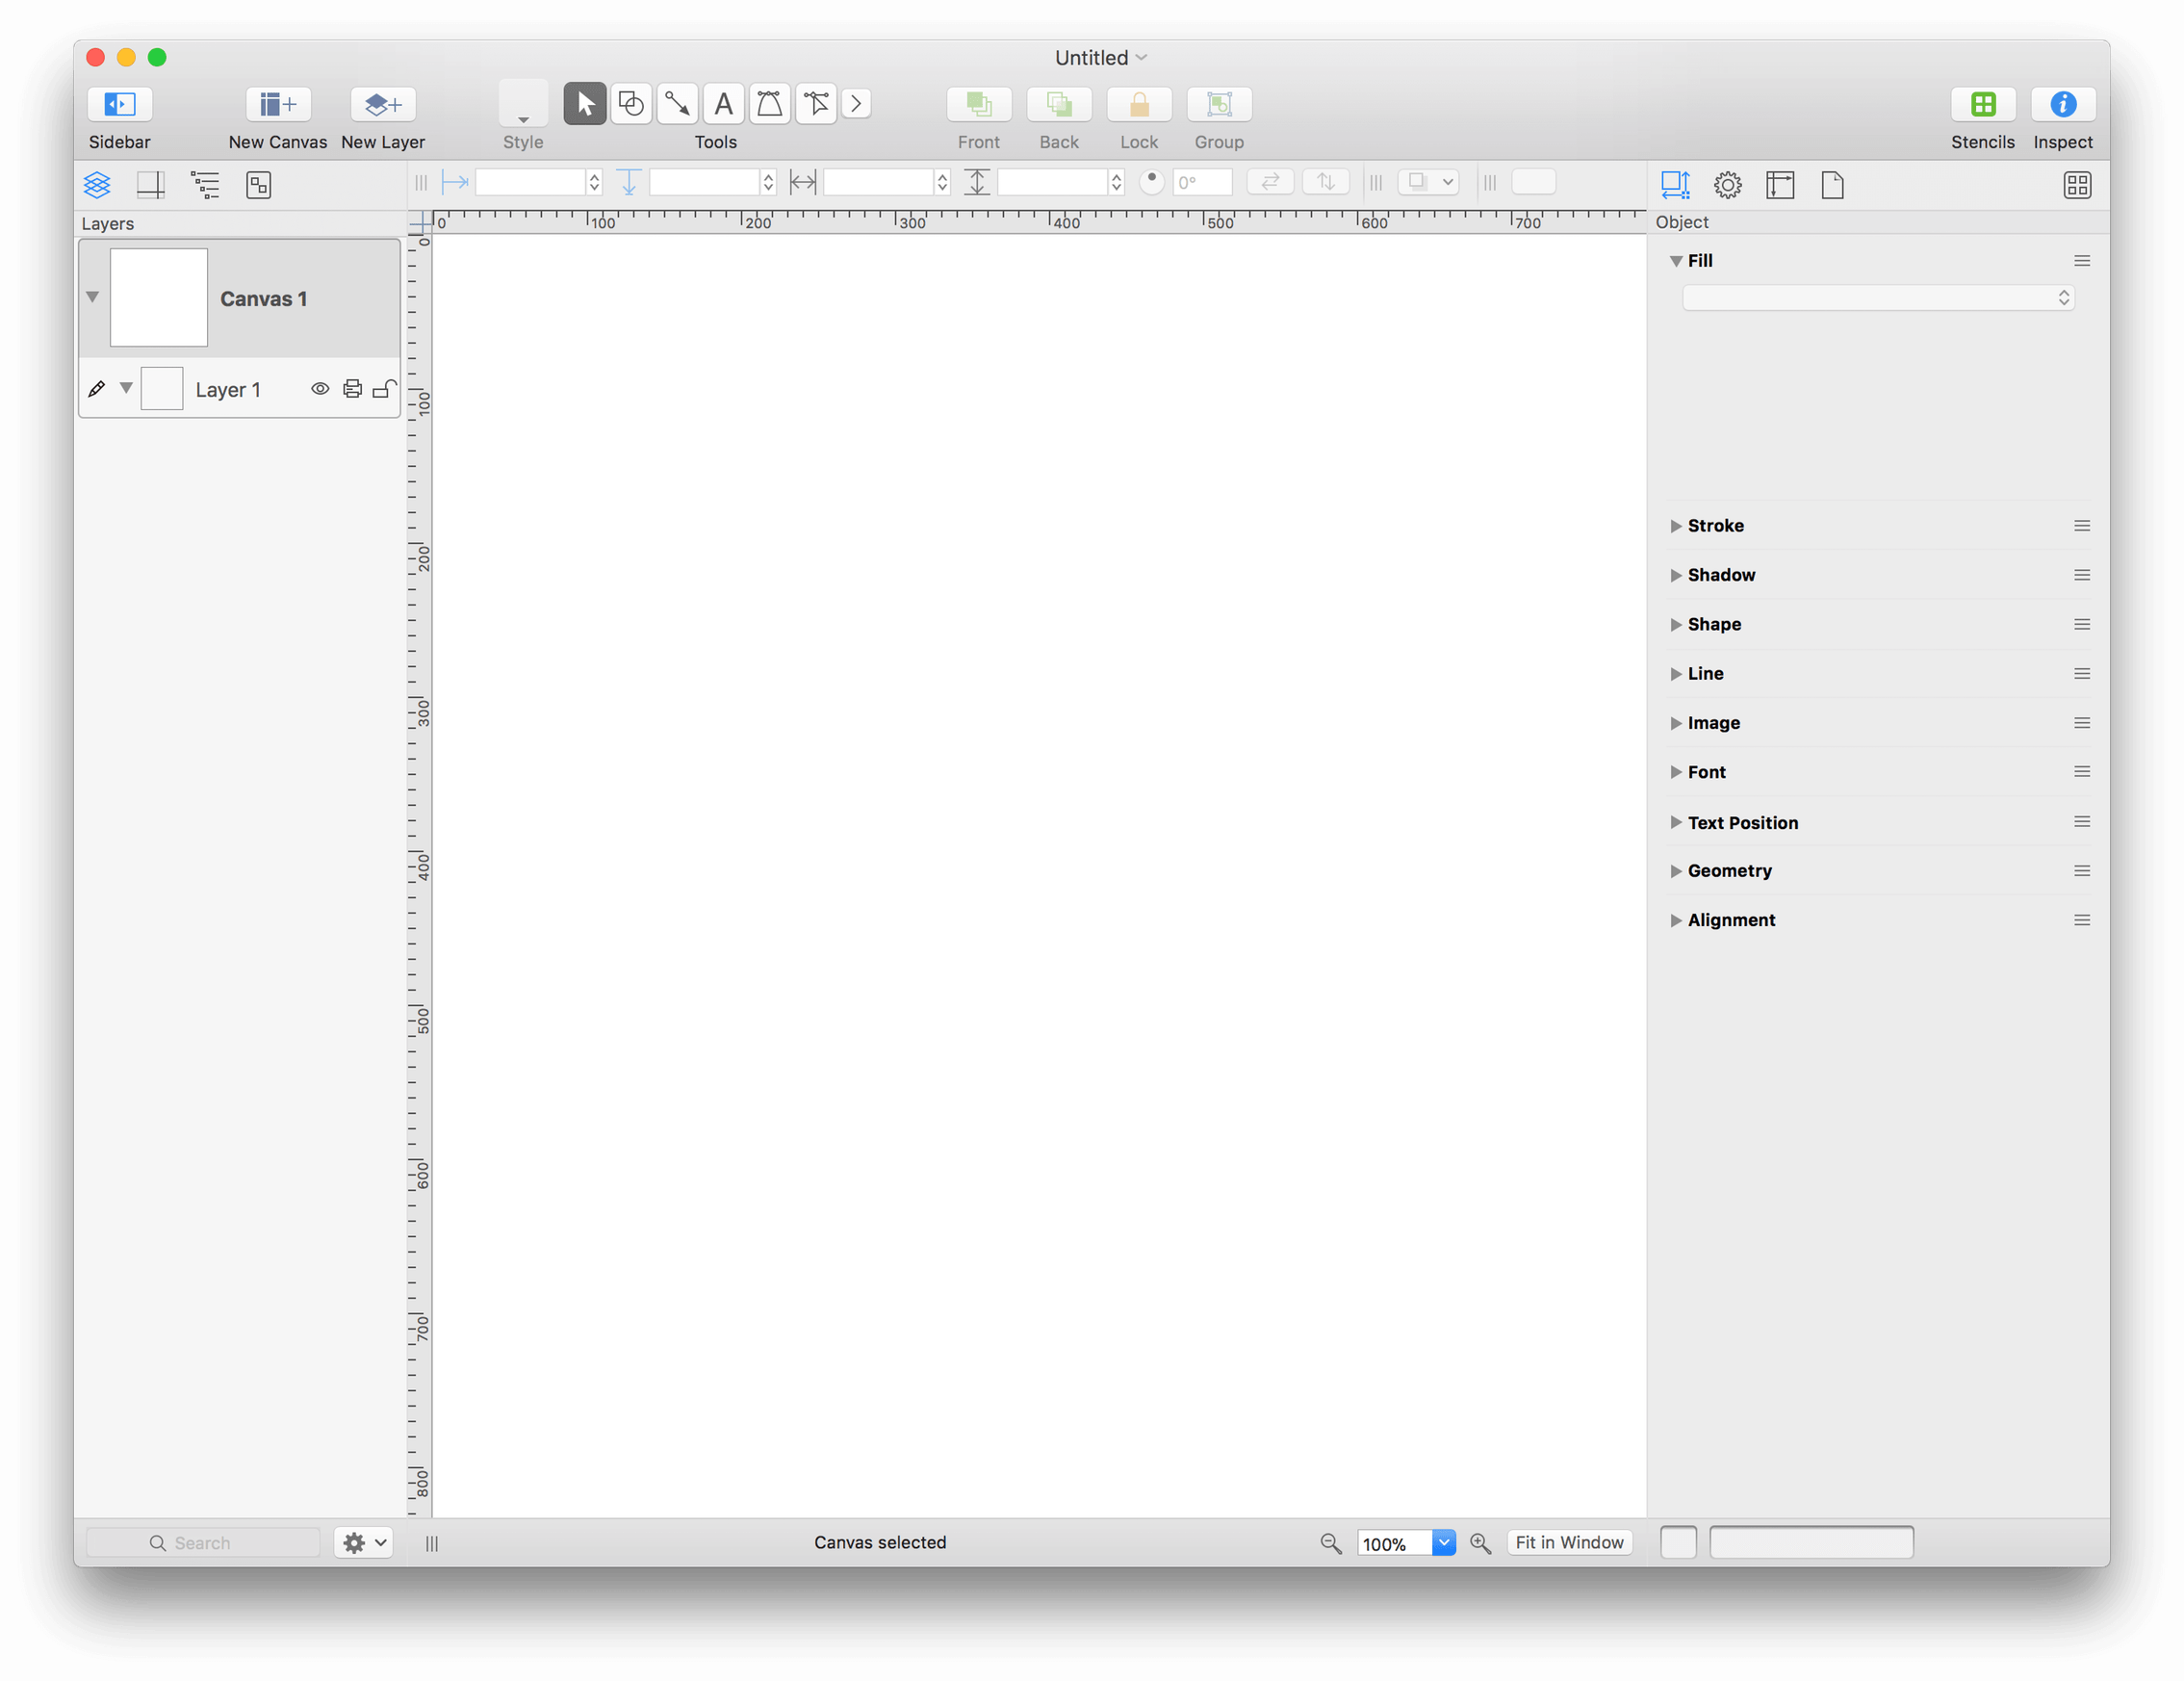 OmniGraffle, after opening the Blank template in a new document window